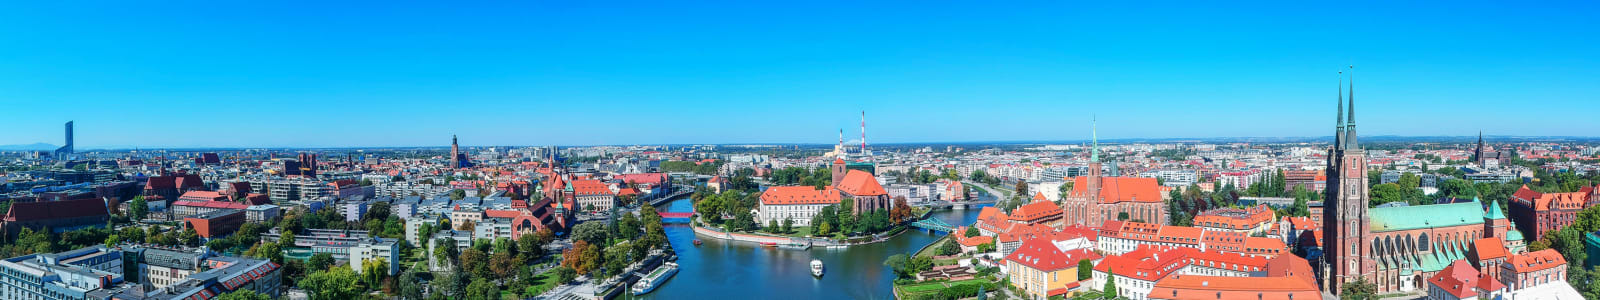 Panorama of Wroclaw, Poland